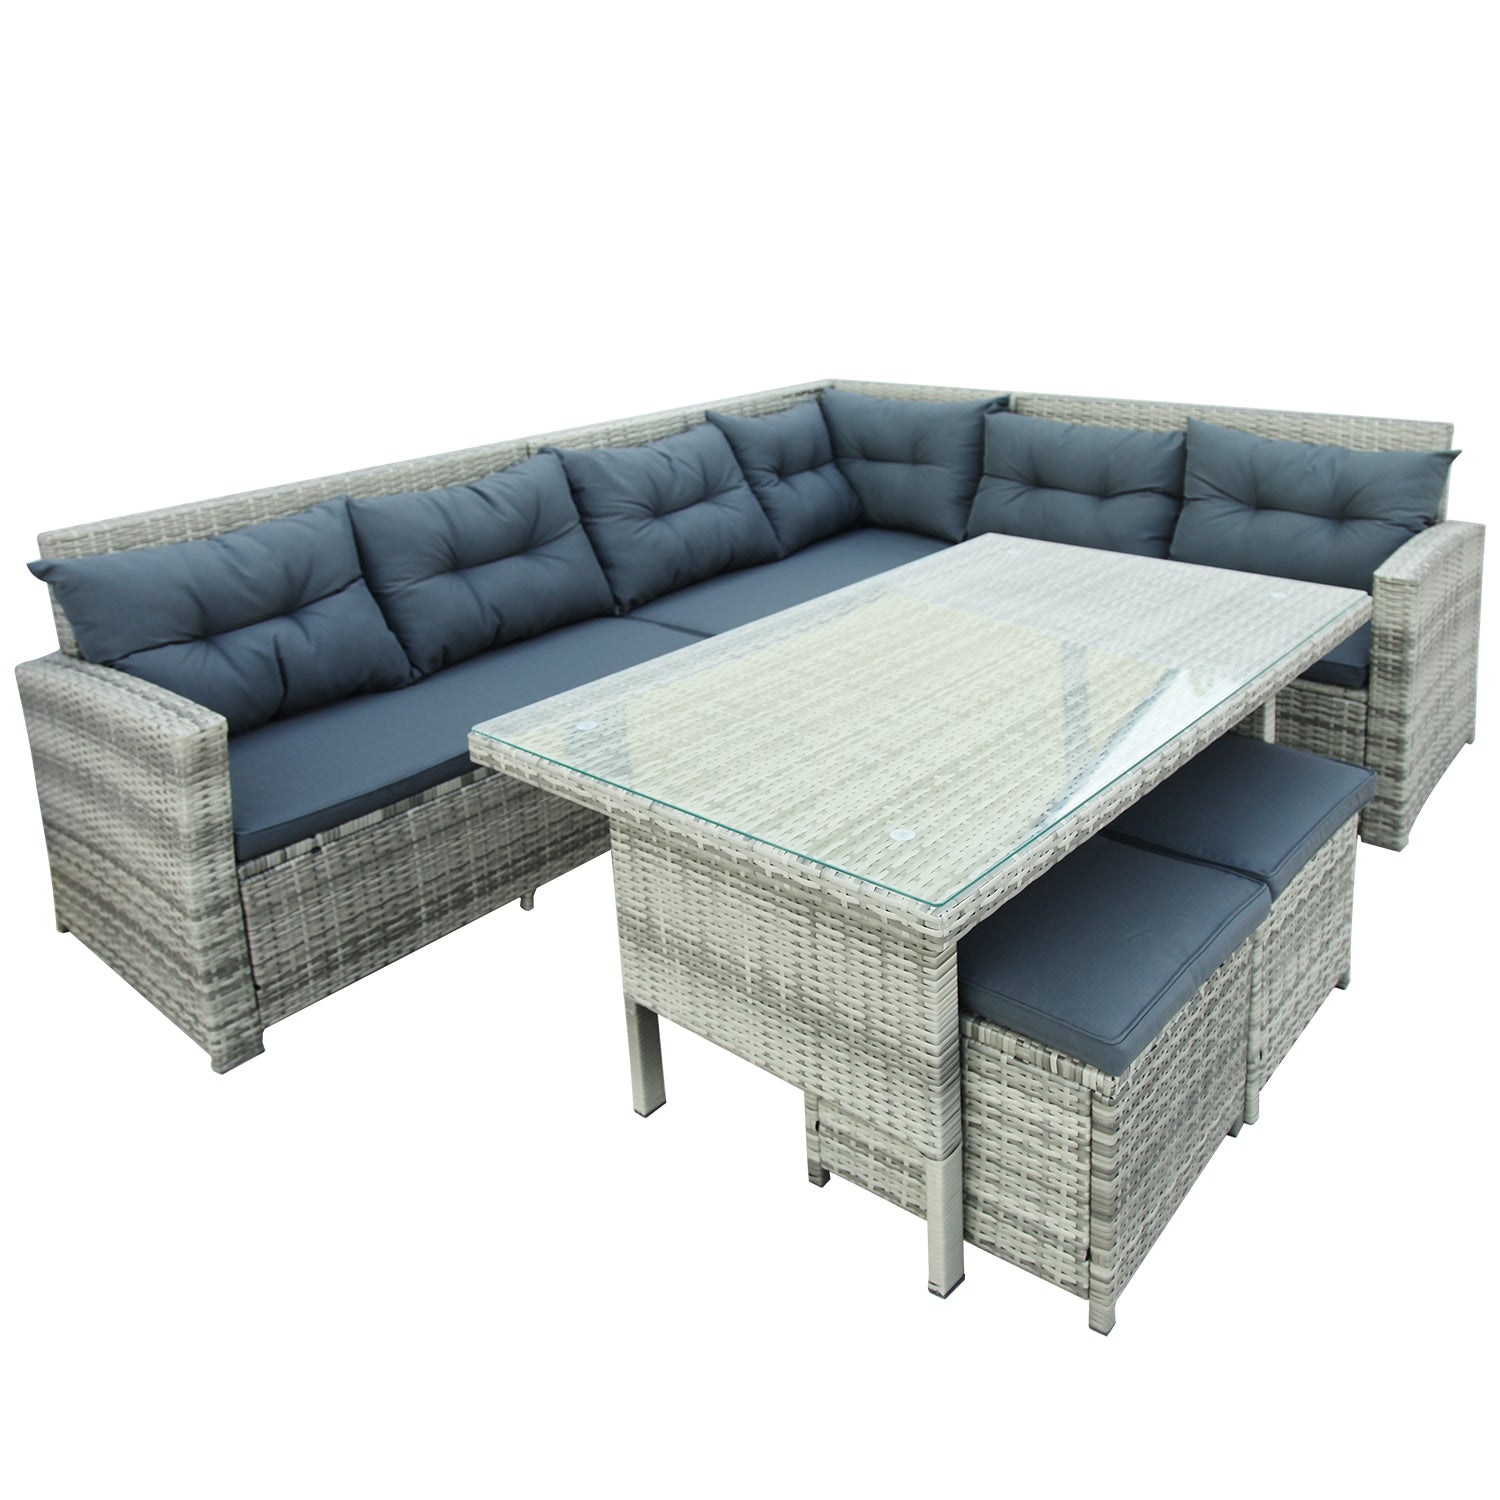 6PC Outdoor Sectional Dining Set Gray